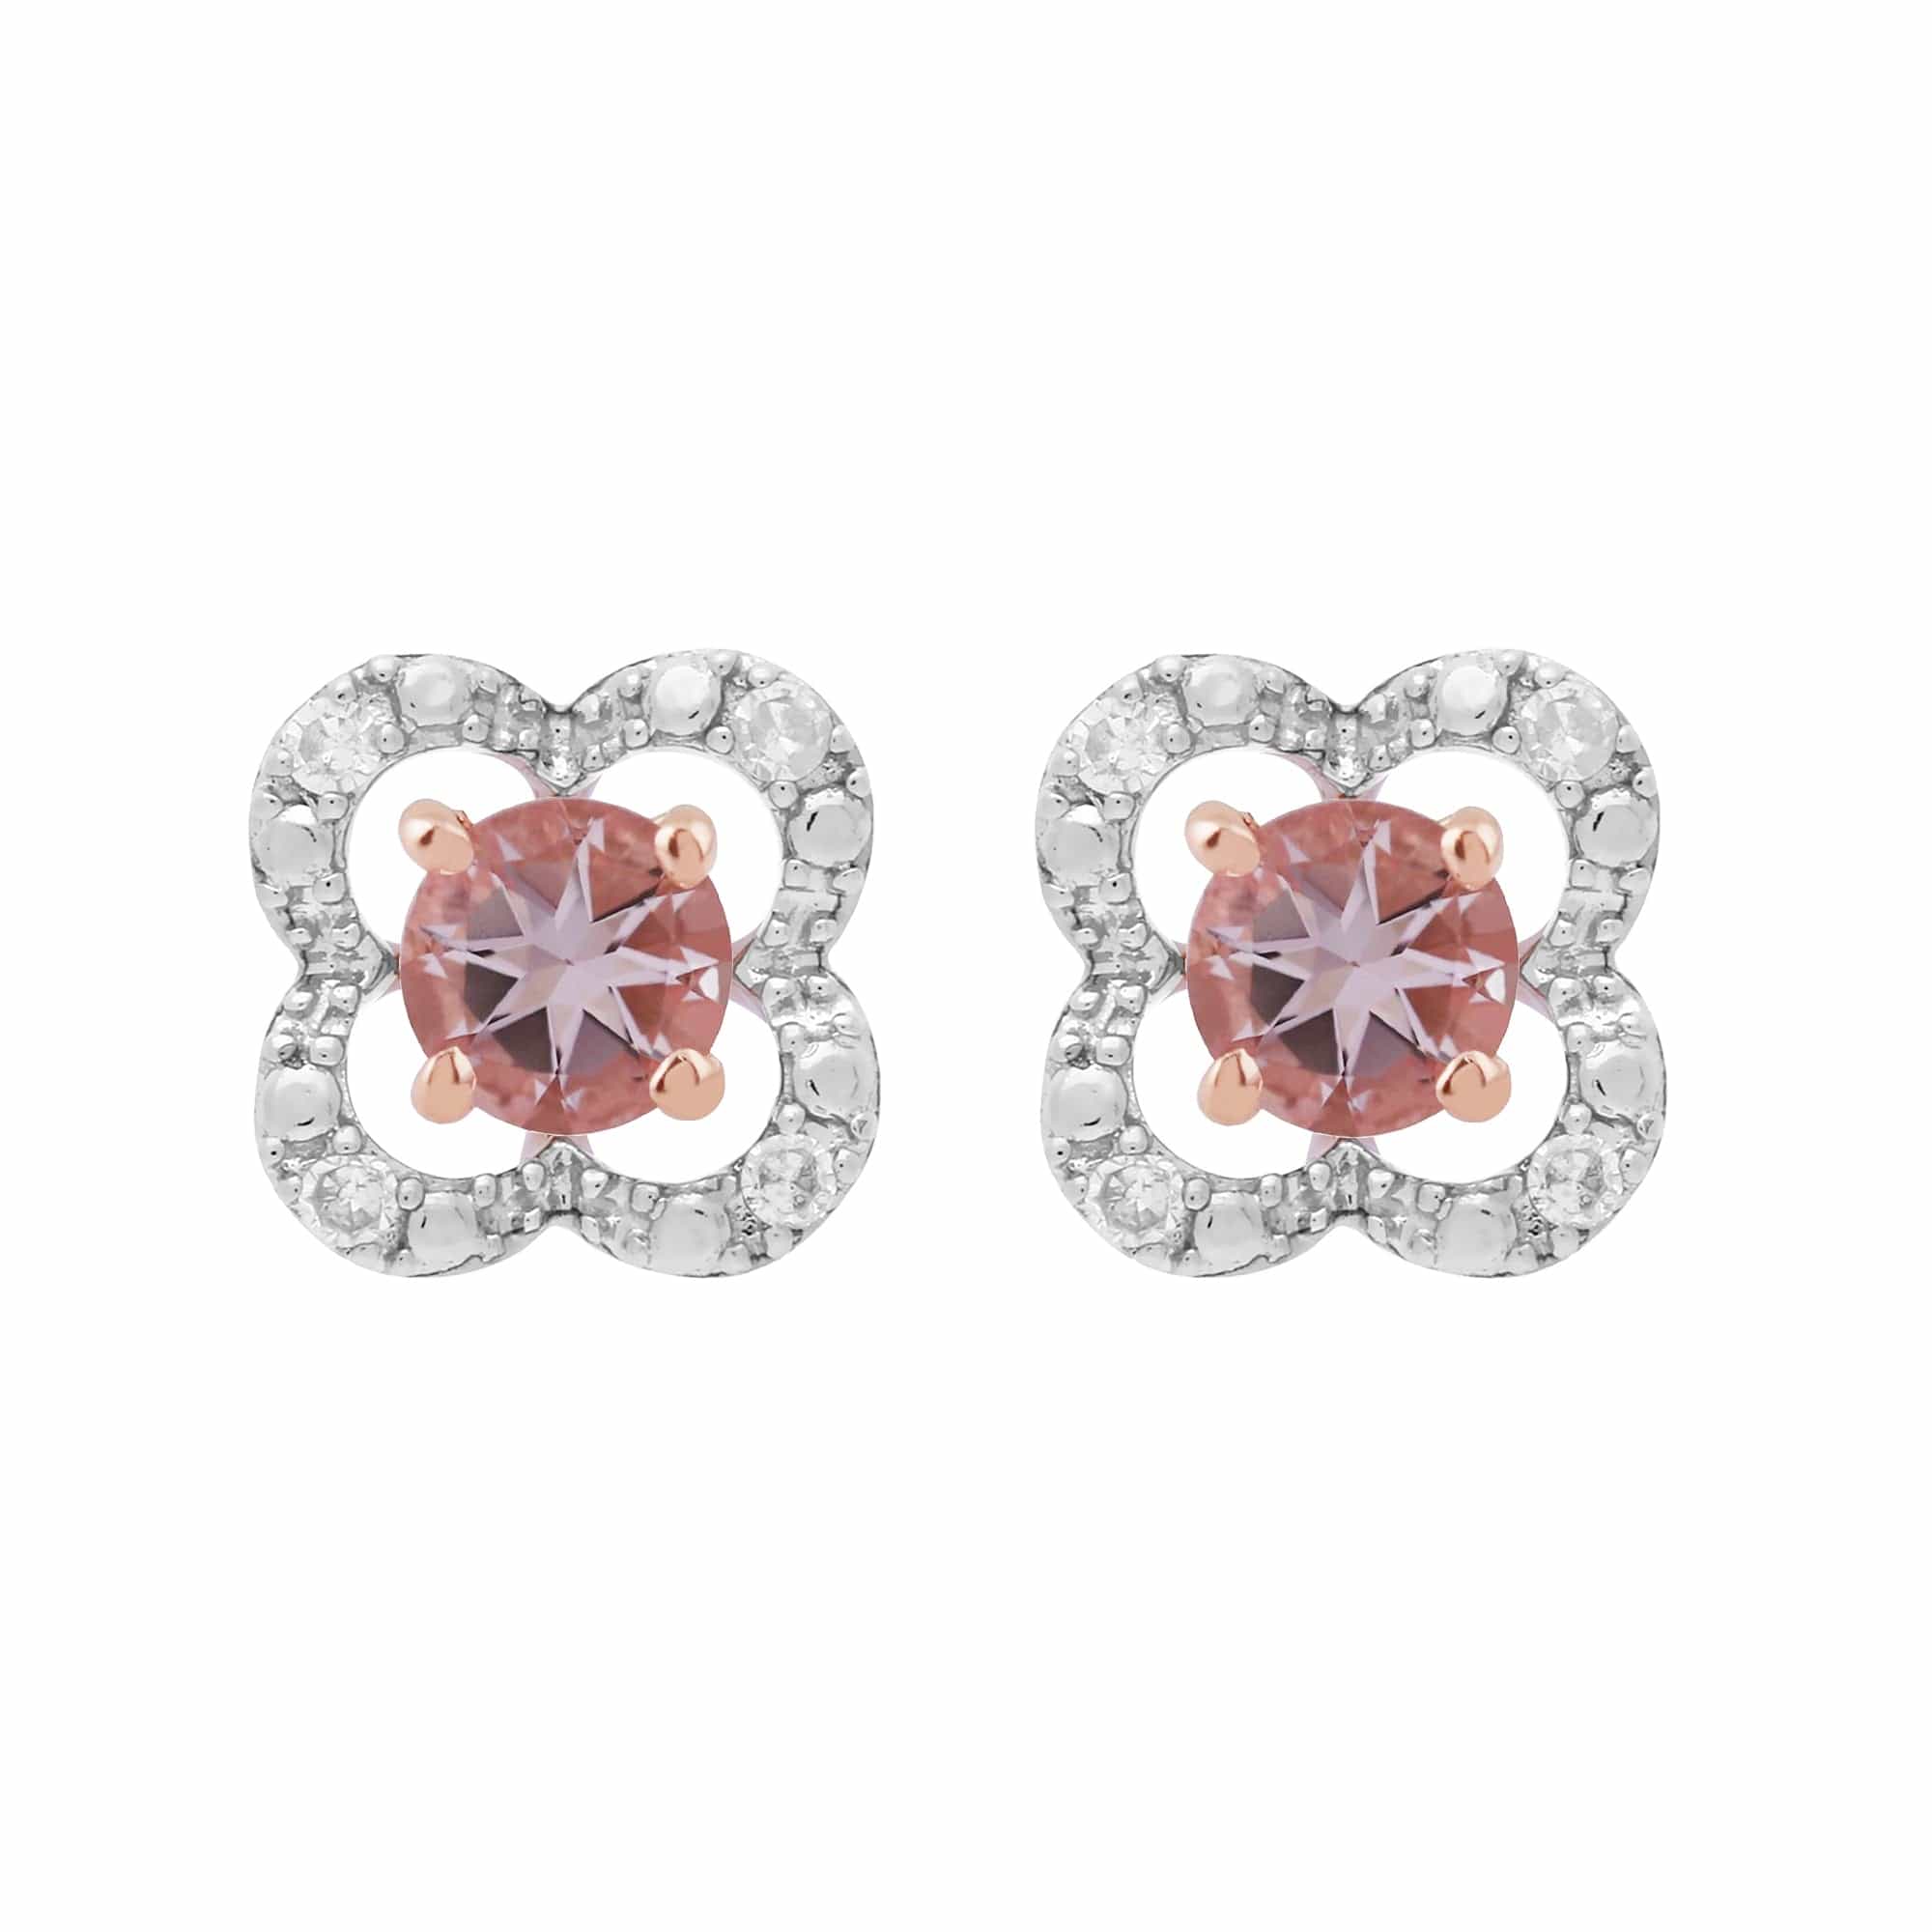 183E4316019-191E0373019 Classic Round Morganite Stud Earrings with Detachable Diamond Flower Jacket in 9ct Rose Gold 1